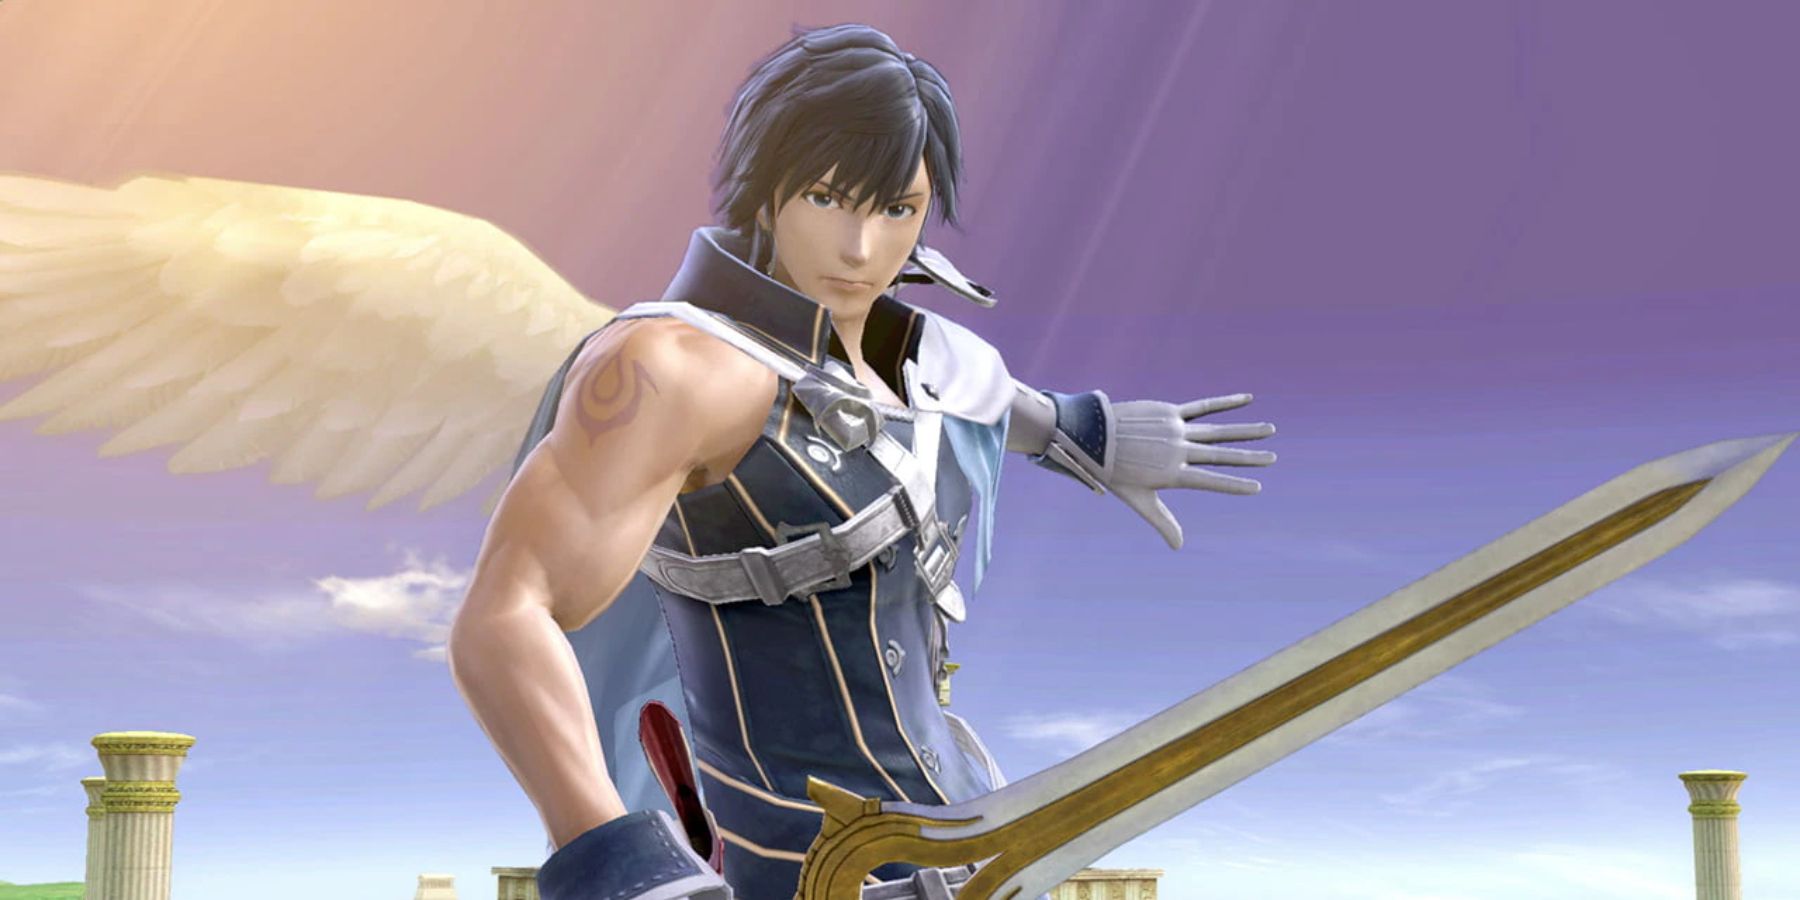 Chrom holding his sword in front of him